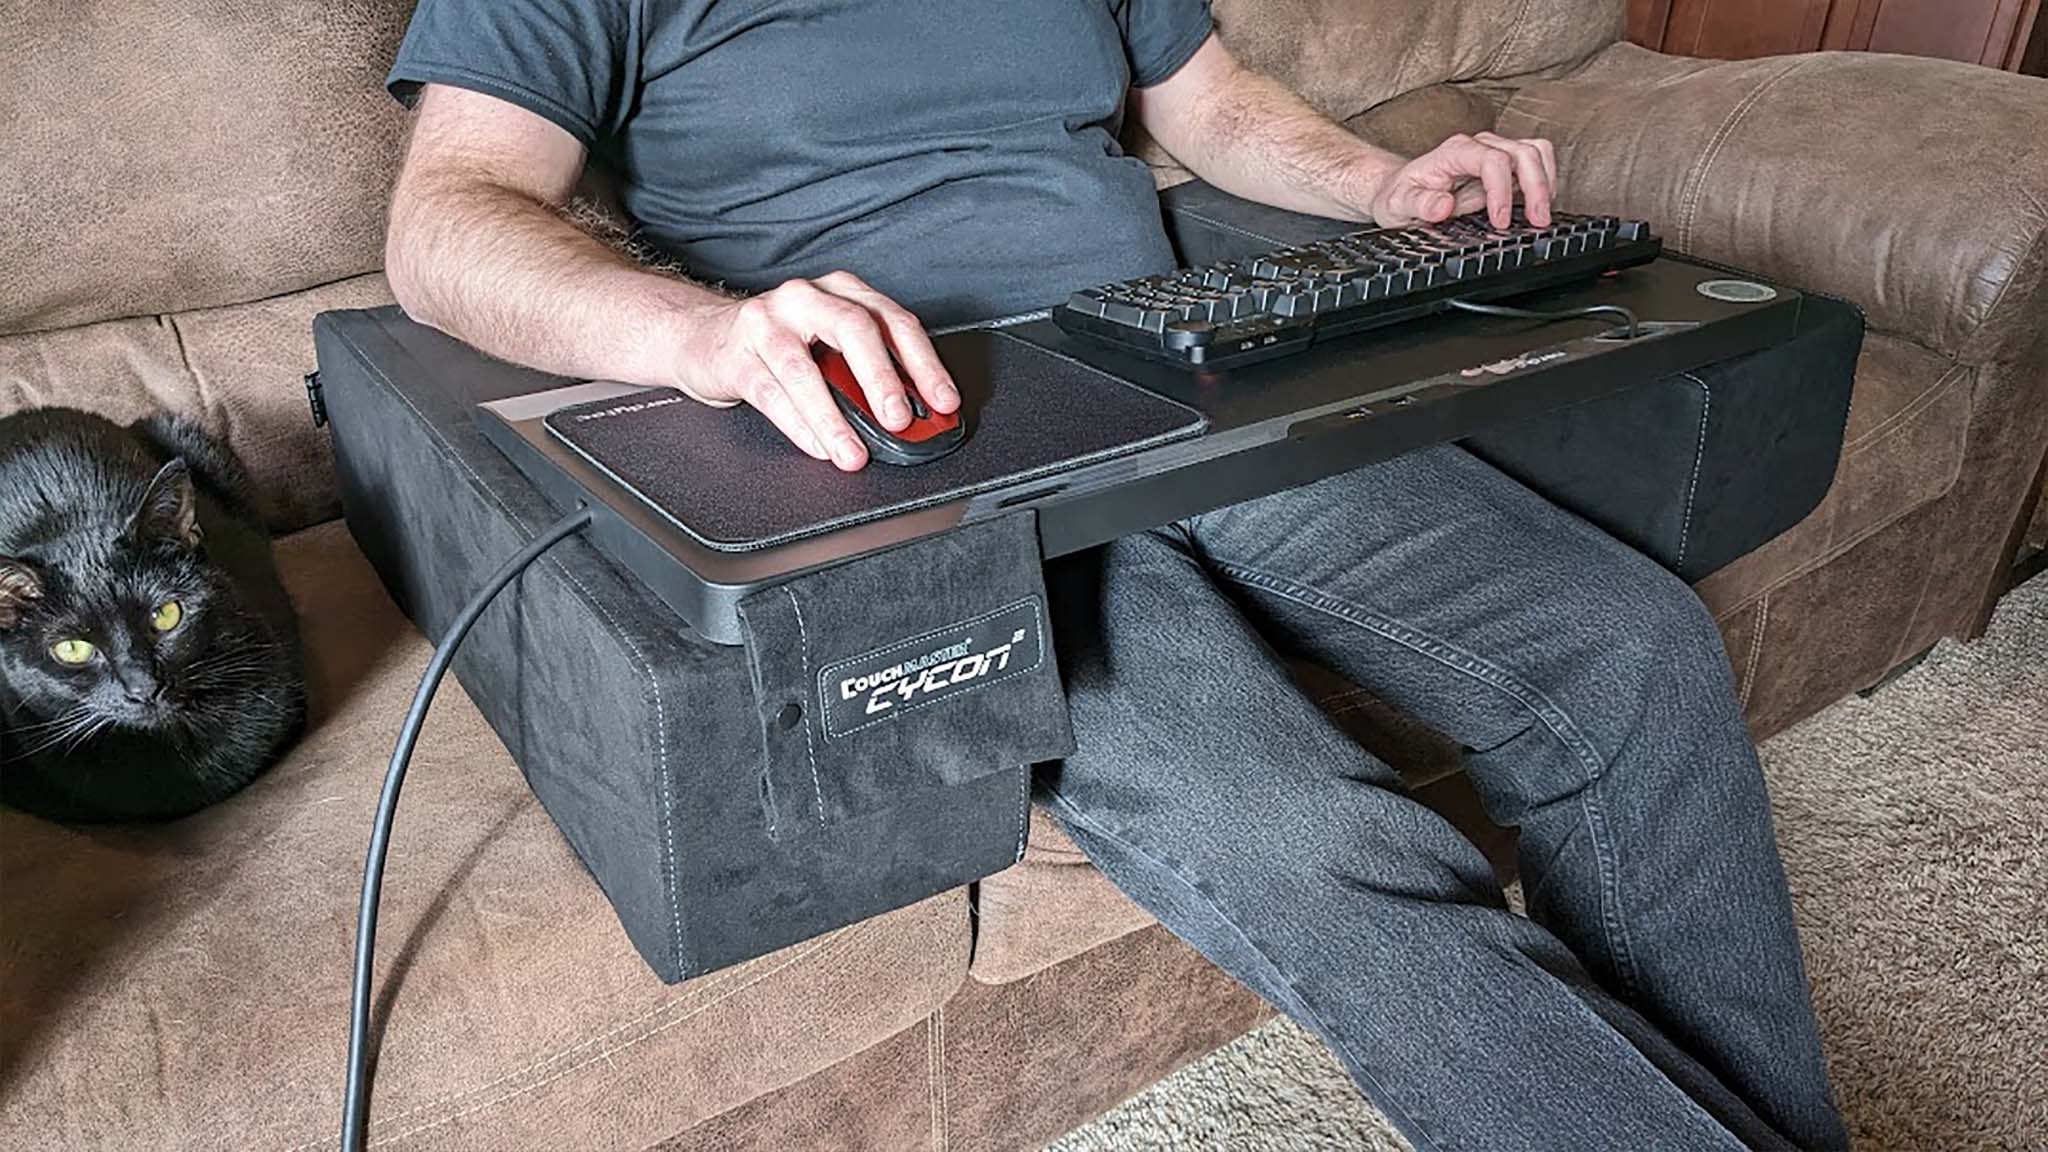 This lap desk with 6 USB ports made our couch my favorite PC gaming spot with a keyboard and mouse